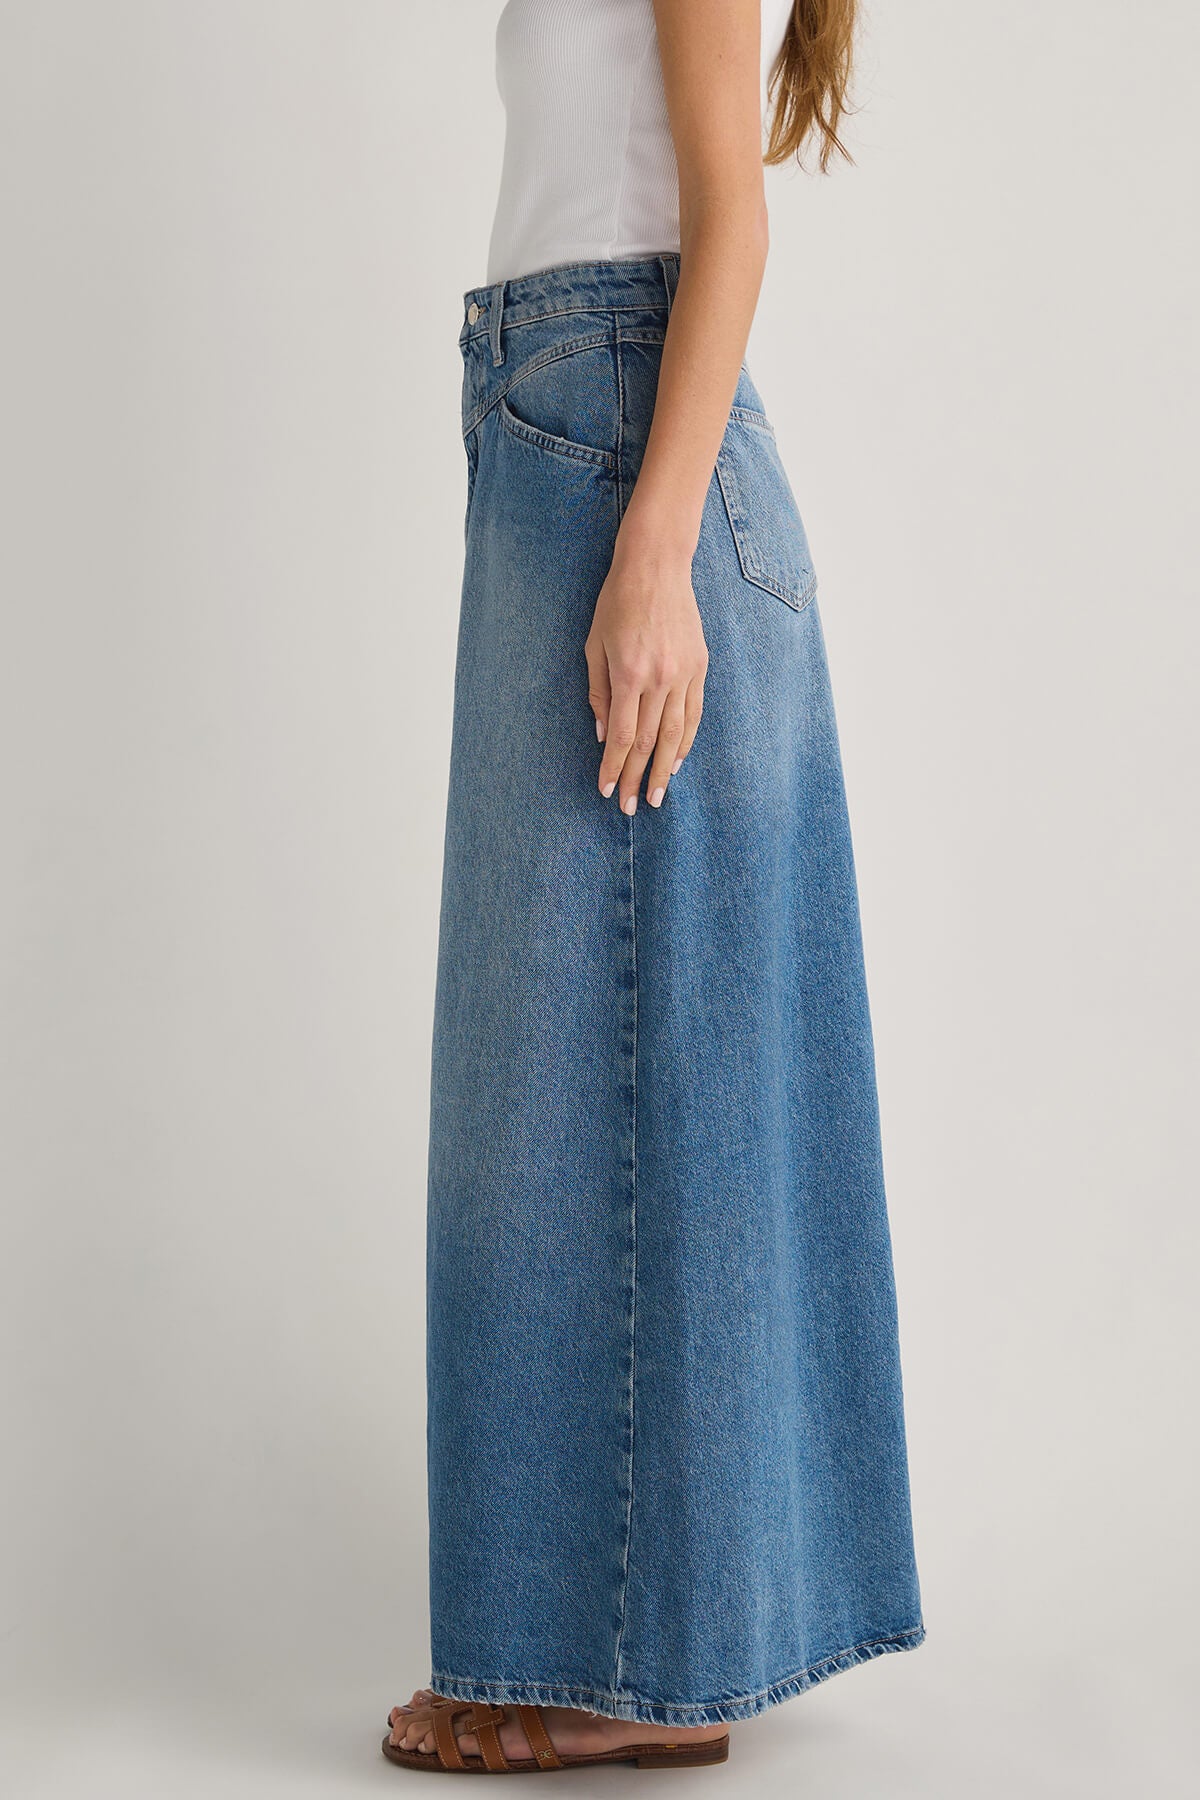 Free People Come As You Are Denim Skirt